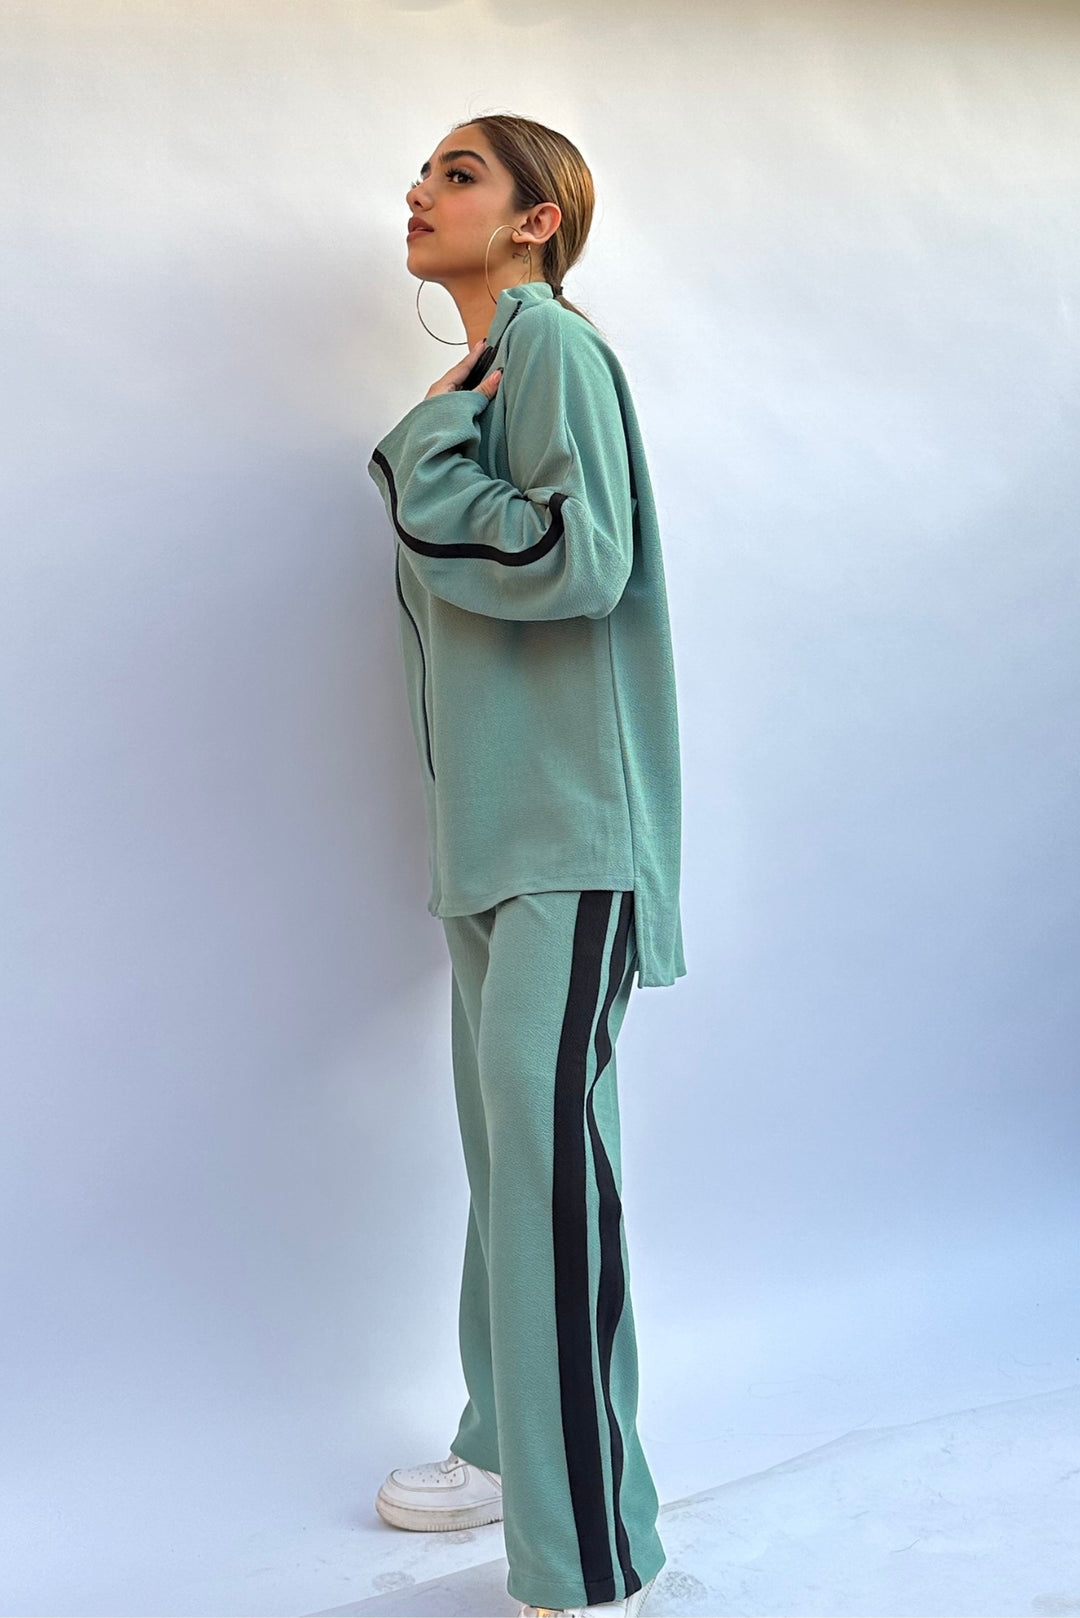 Oversized teal green coord set with side stripe detail